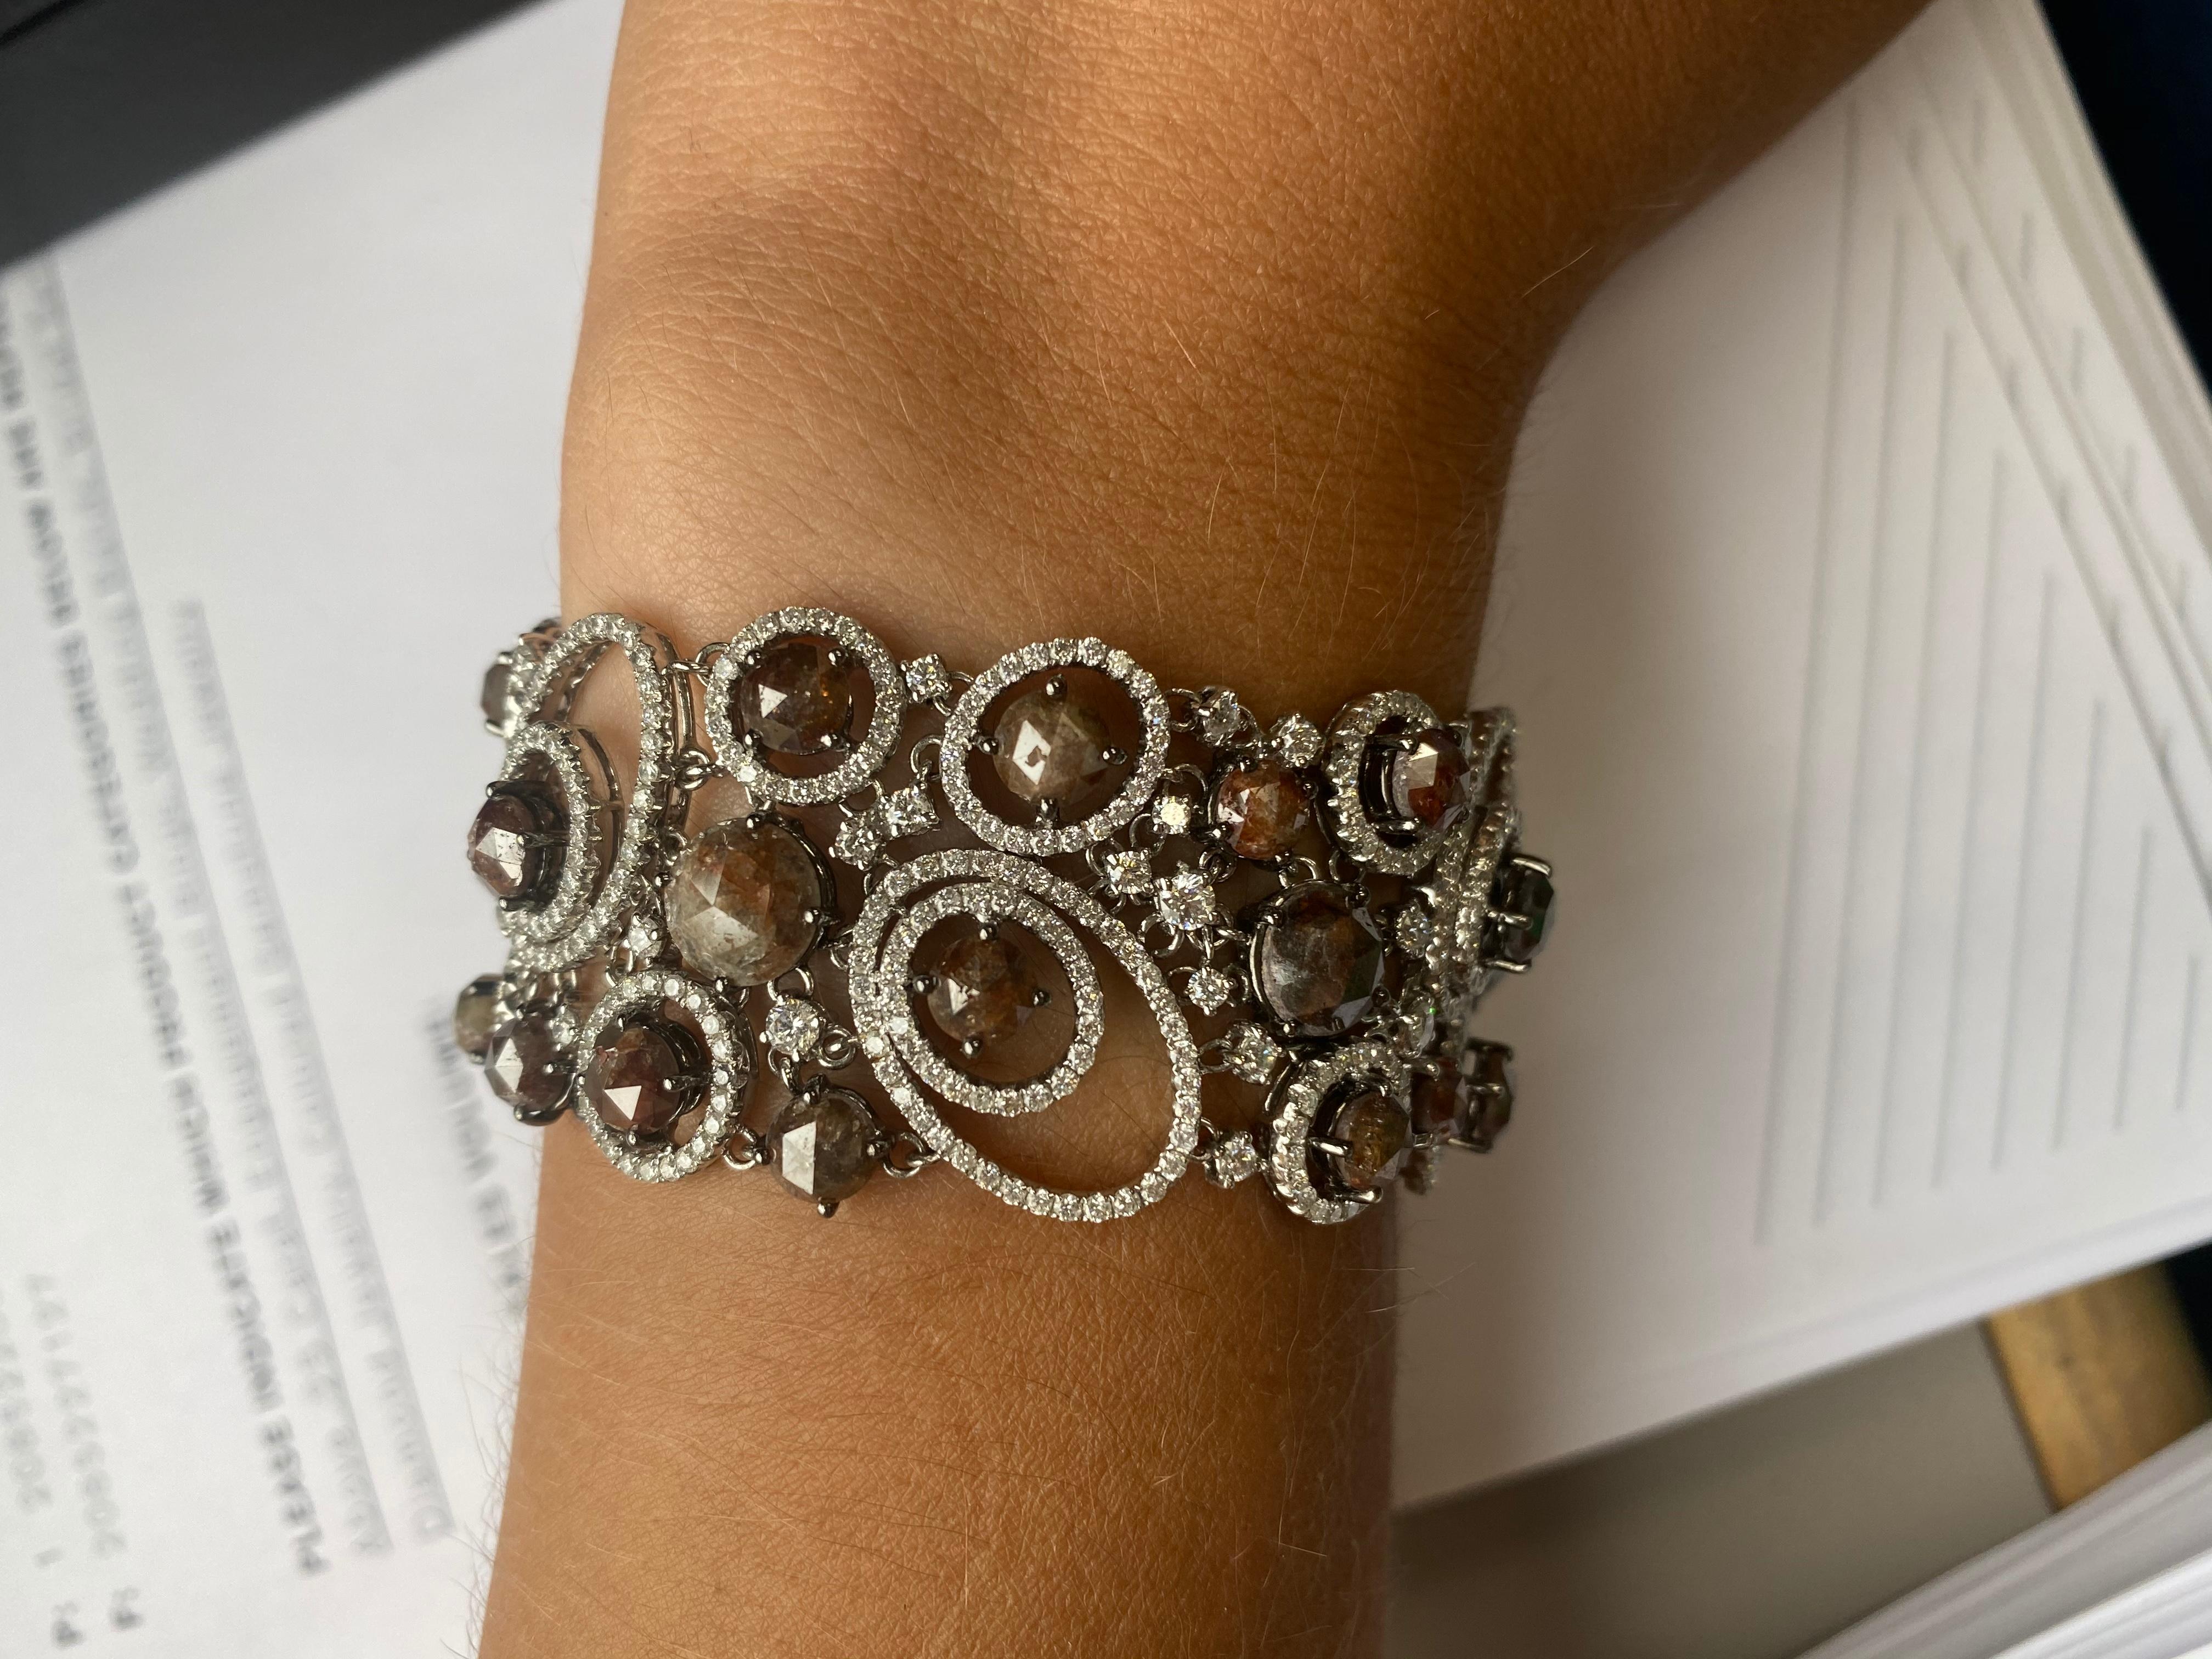 One-of-a-kind diamond bracelet designed by Diana M. Jewels, features 39.00 Carats of diamonds. 

Description
Virtuosic diamond bracelet
White gold bracelet with round brilliant and rough cut diamonds.
Length: 7